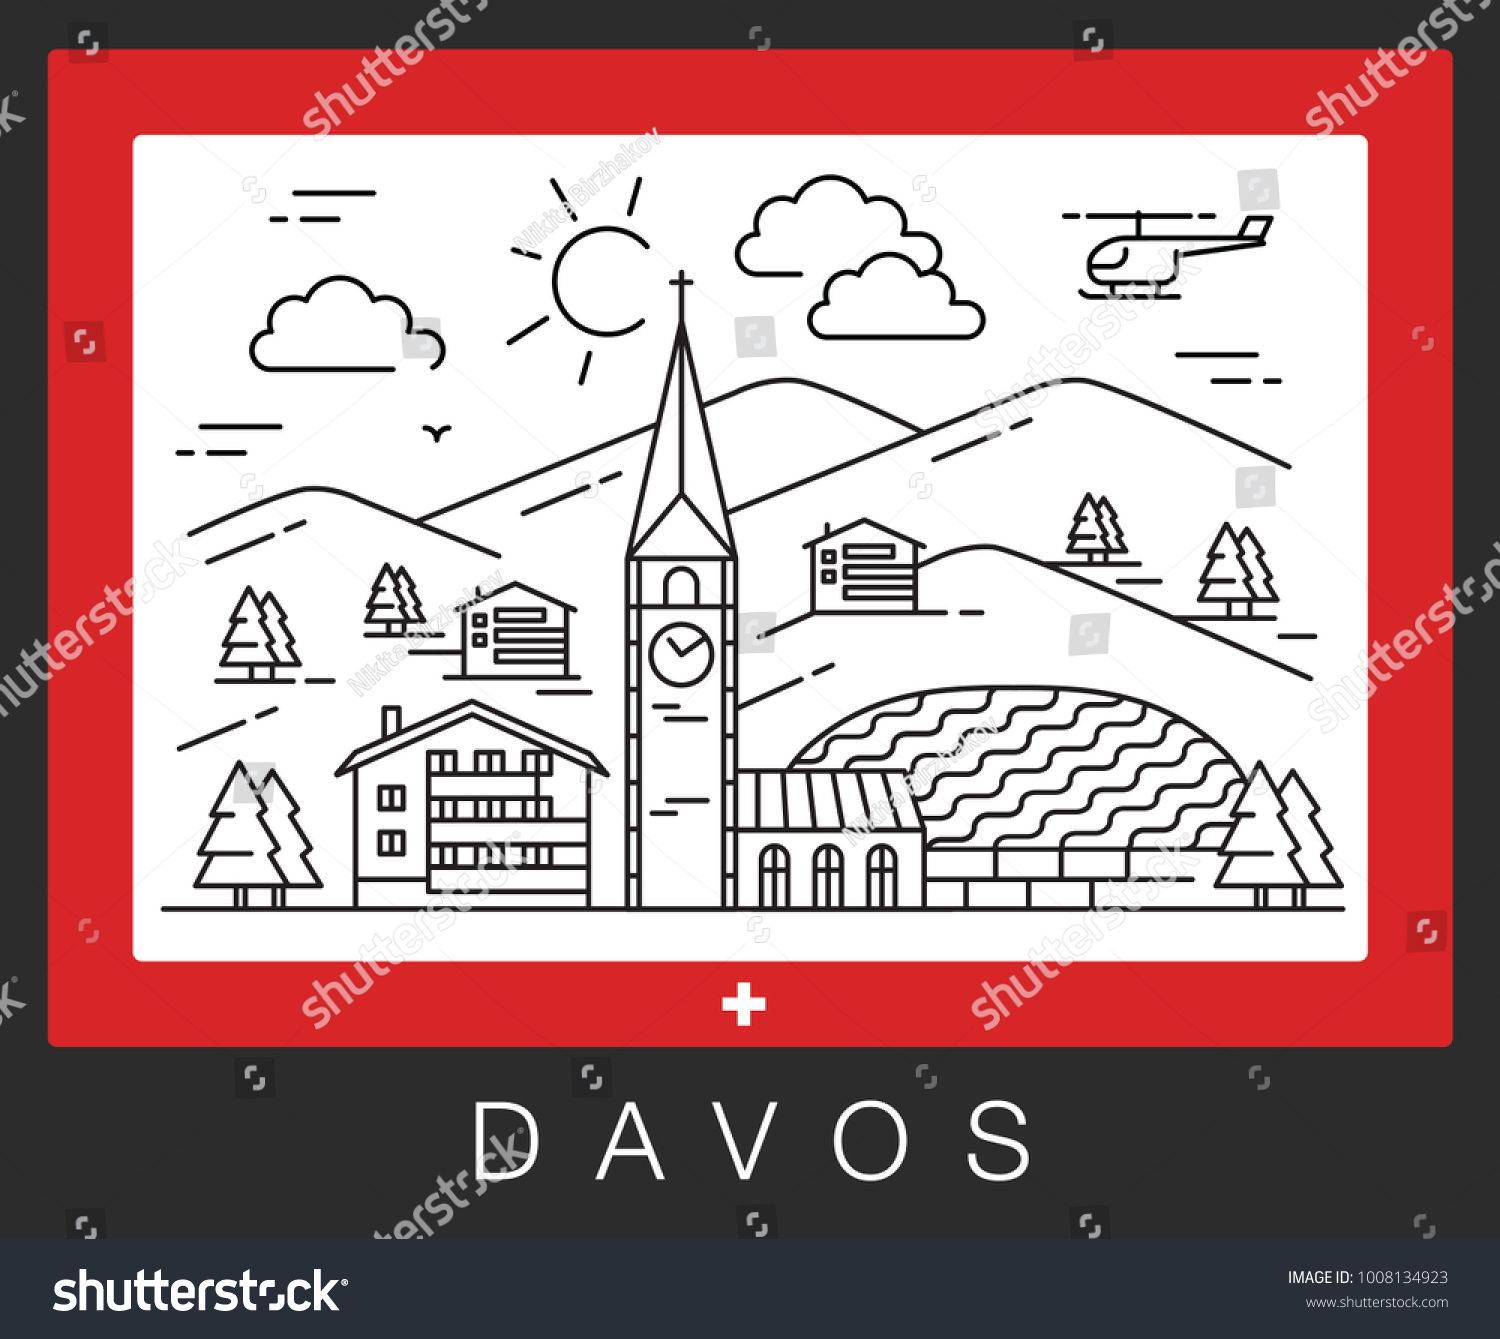 SVG of Davos, Switzerland. View of the city attractions. Vector illustration svg